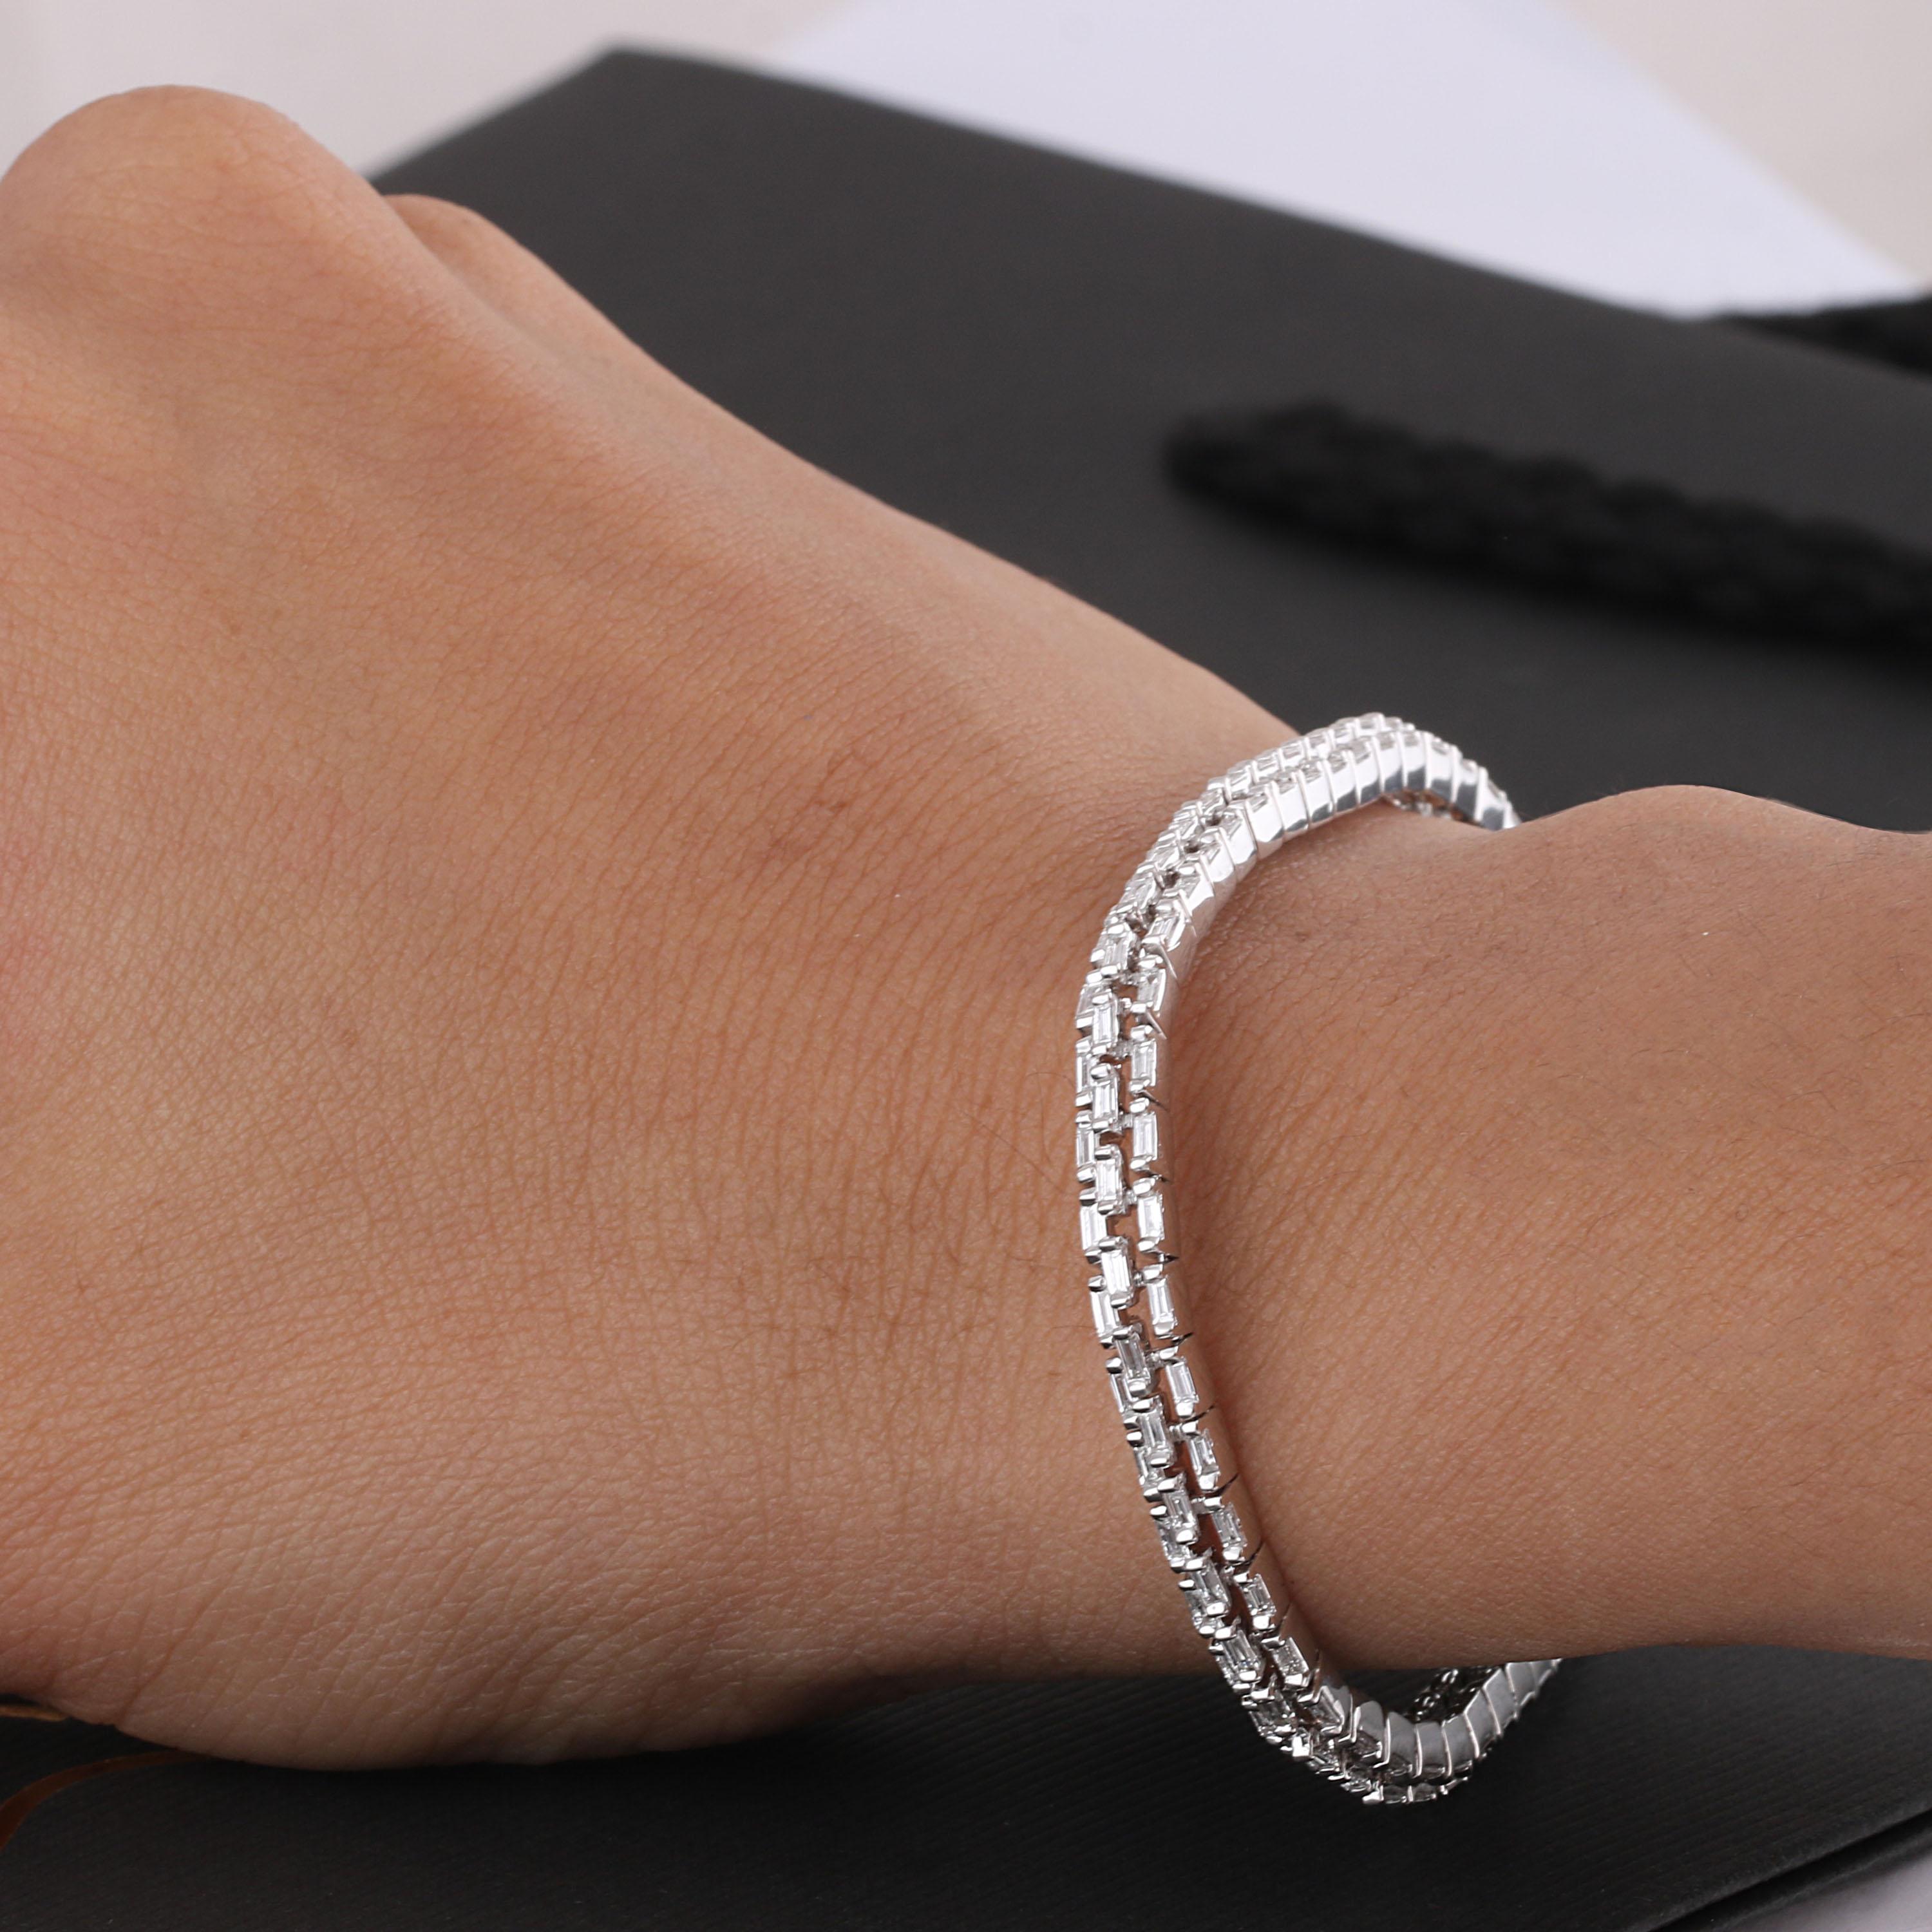 Gross Weight: 16.44 Grams
Diamond Weight: 2.38 cts
Length: 6.90 Inches
GI Certification can be done on Request

Video of the product can be shared on request.

Exemplifying the timeless allure of the tennis bracelet is this 18K white gold rendition